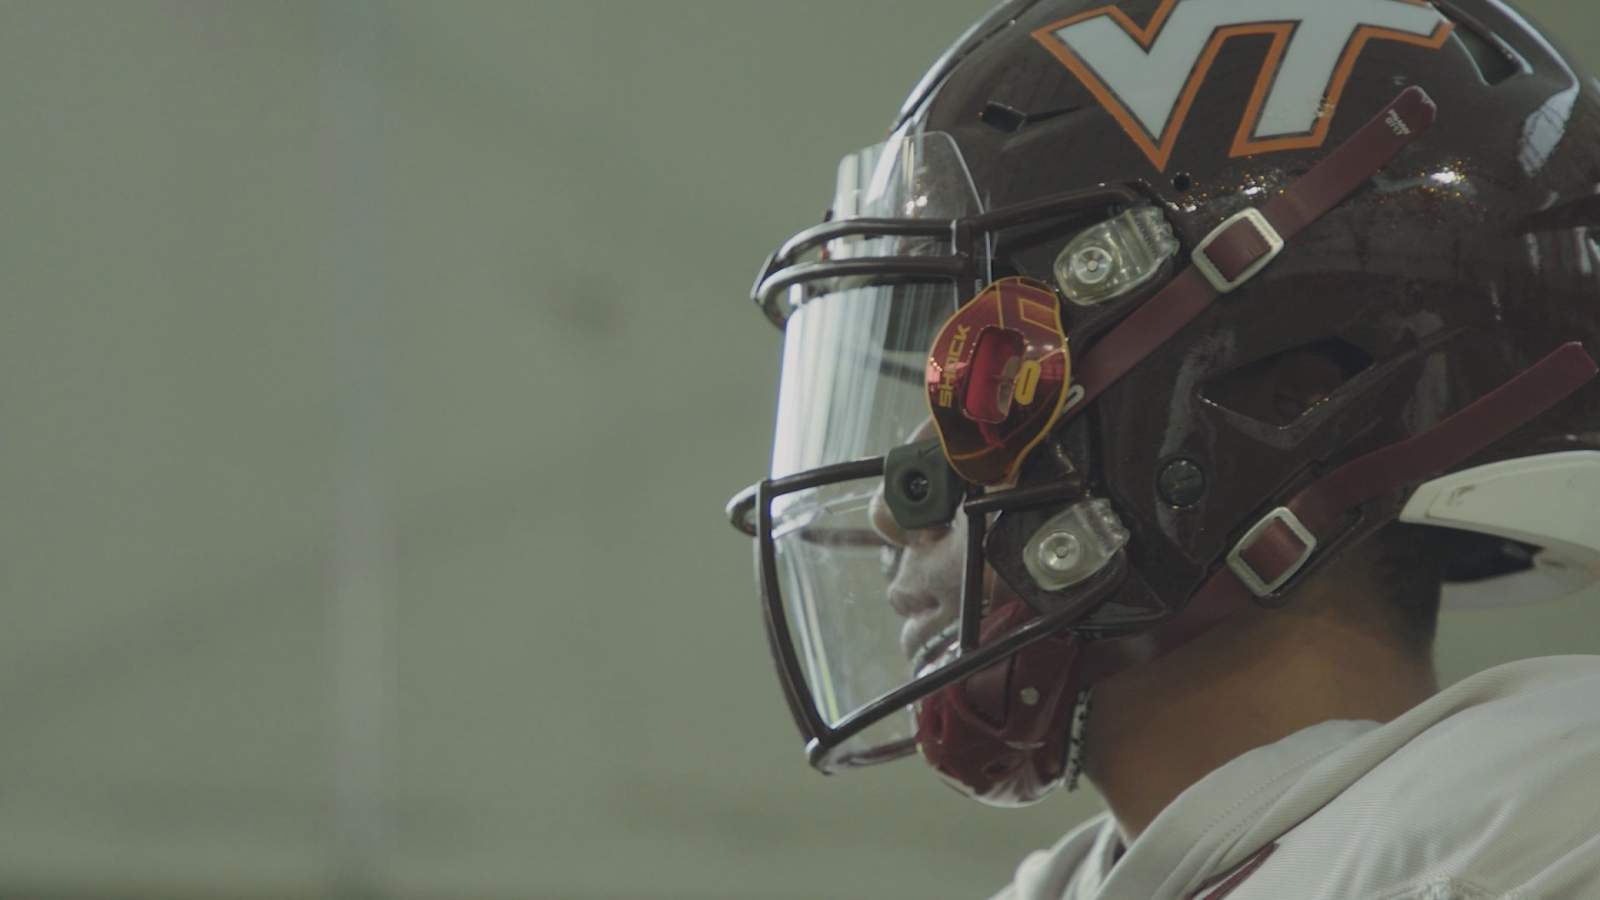 Virginia Tech producing face shields to protect against Covid-19